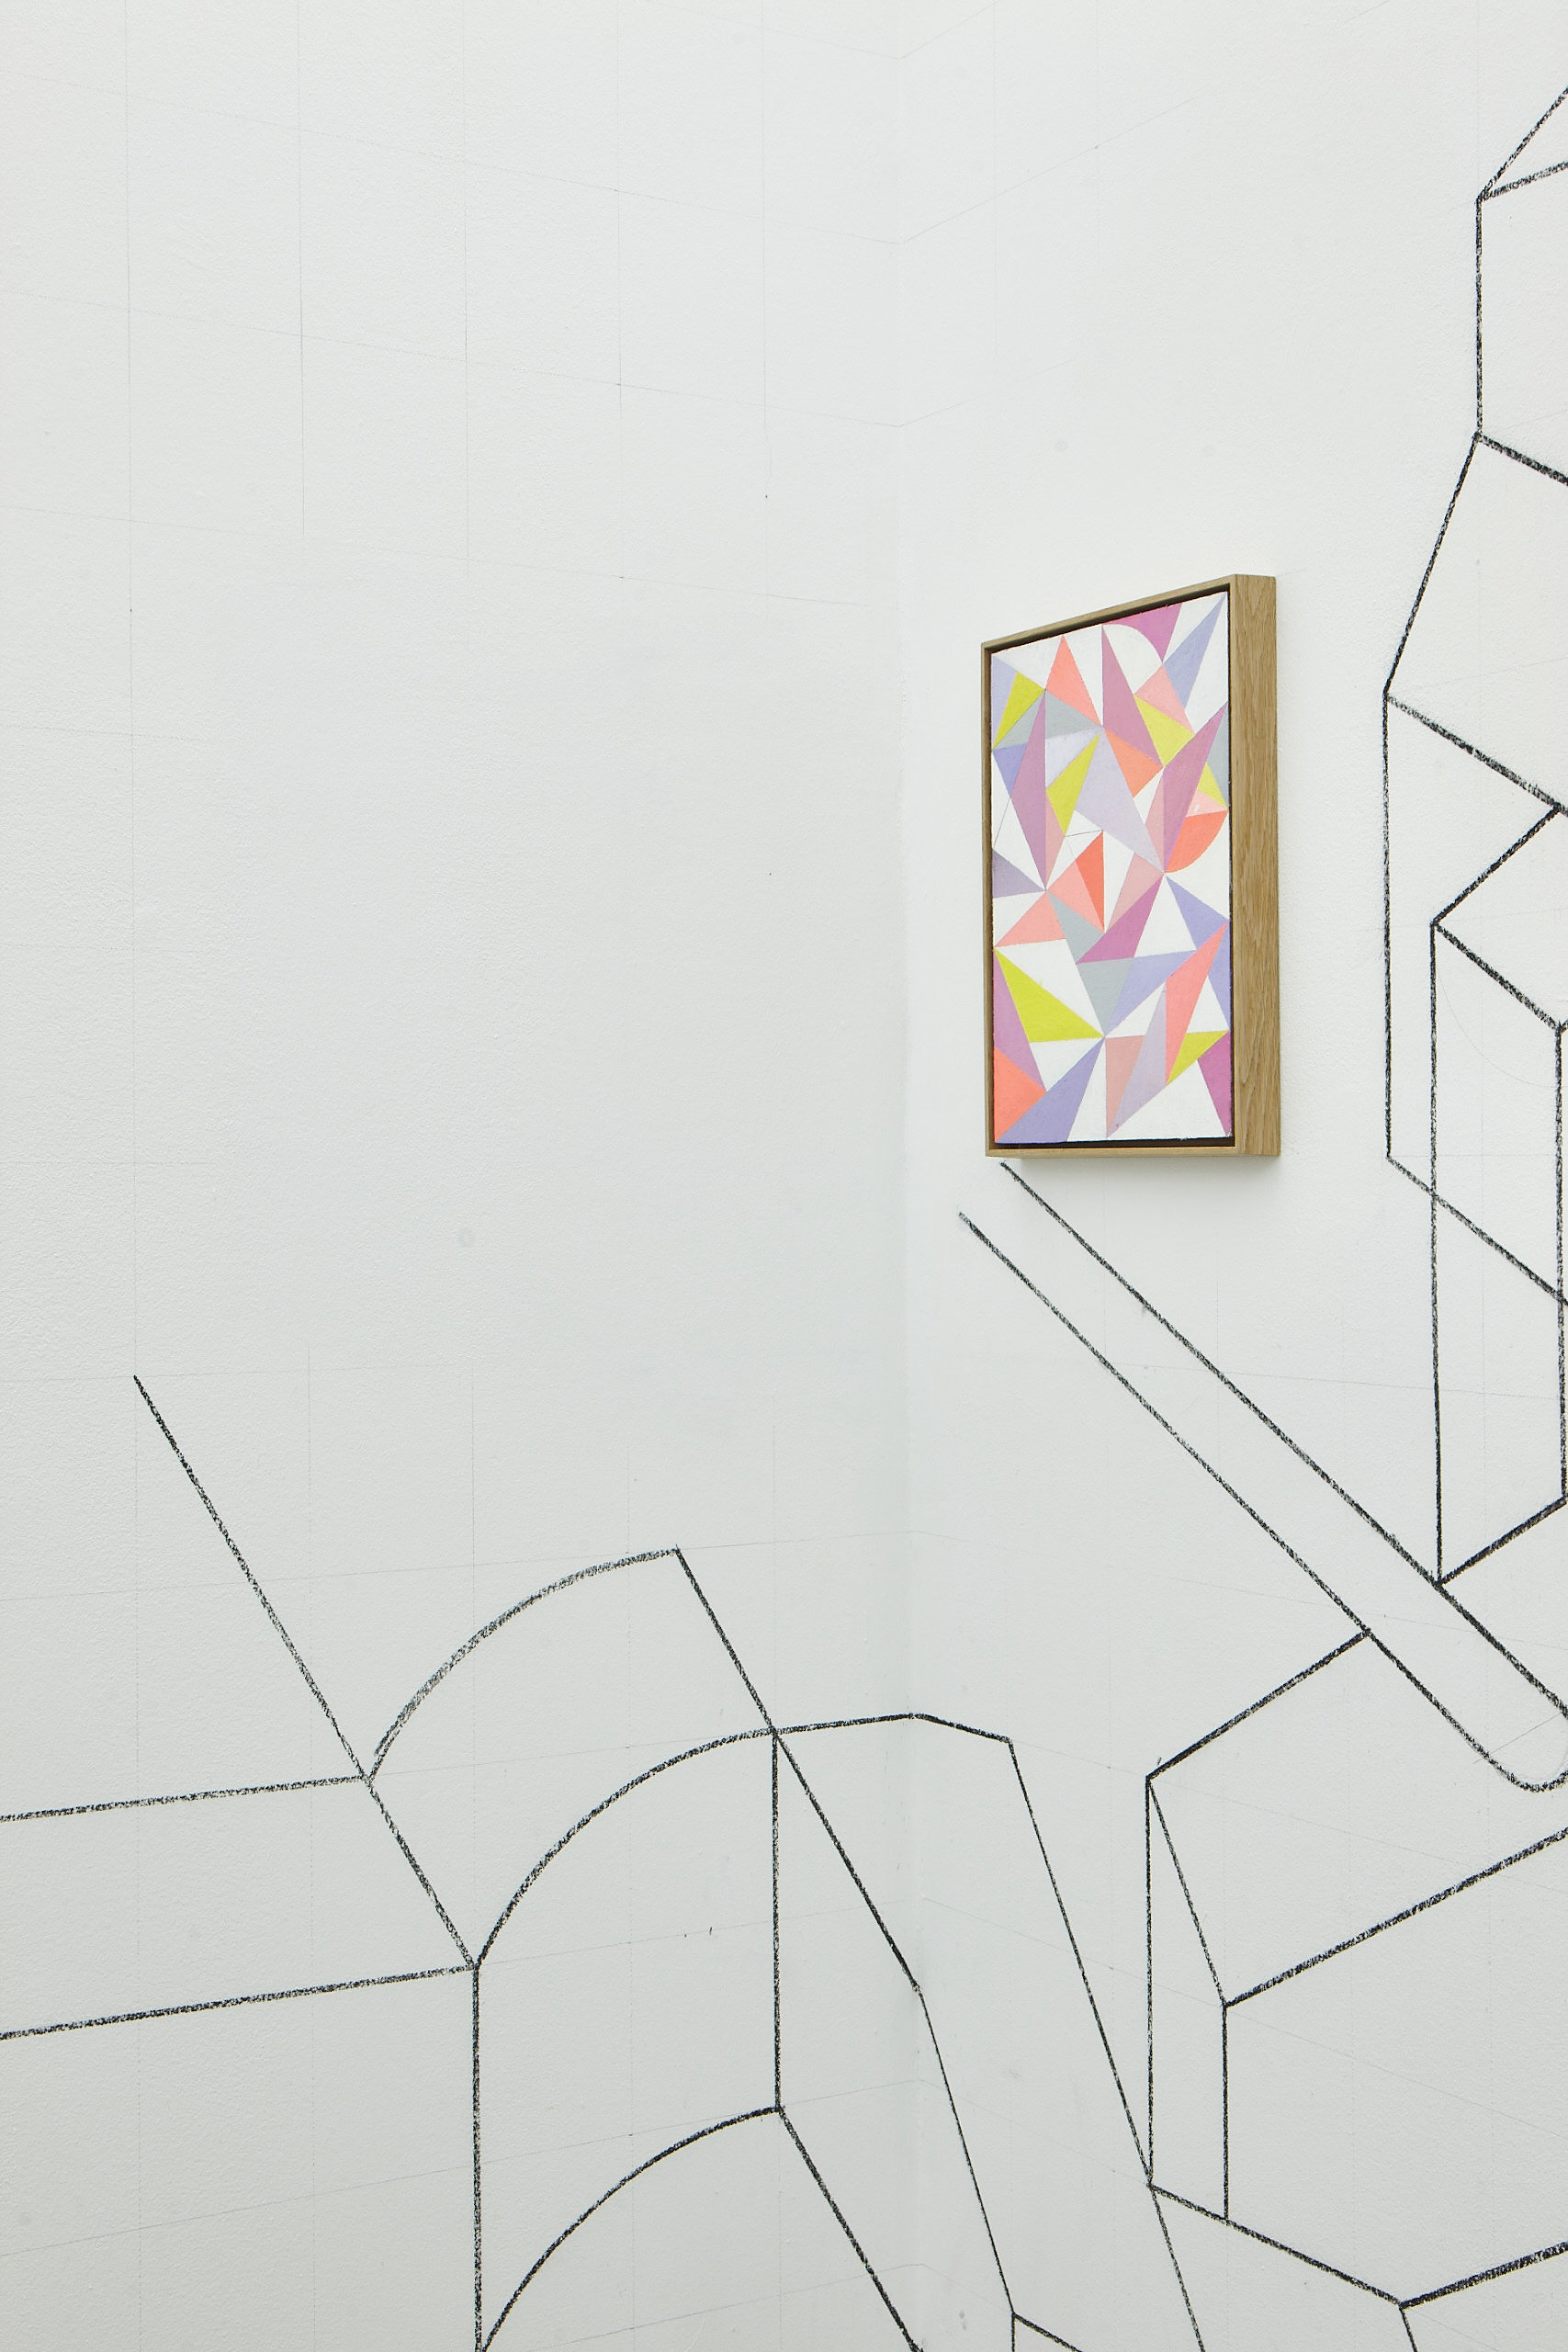 Michael Conrads, Installation views from "Superimpositions"